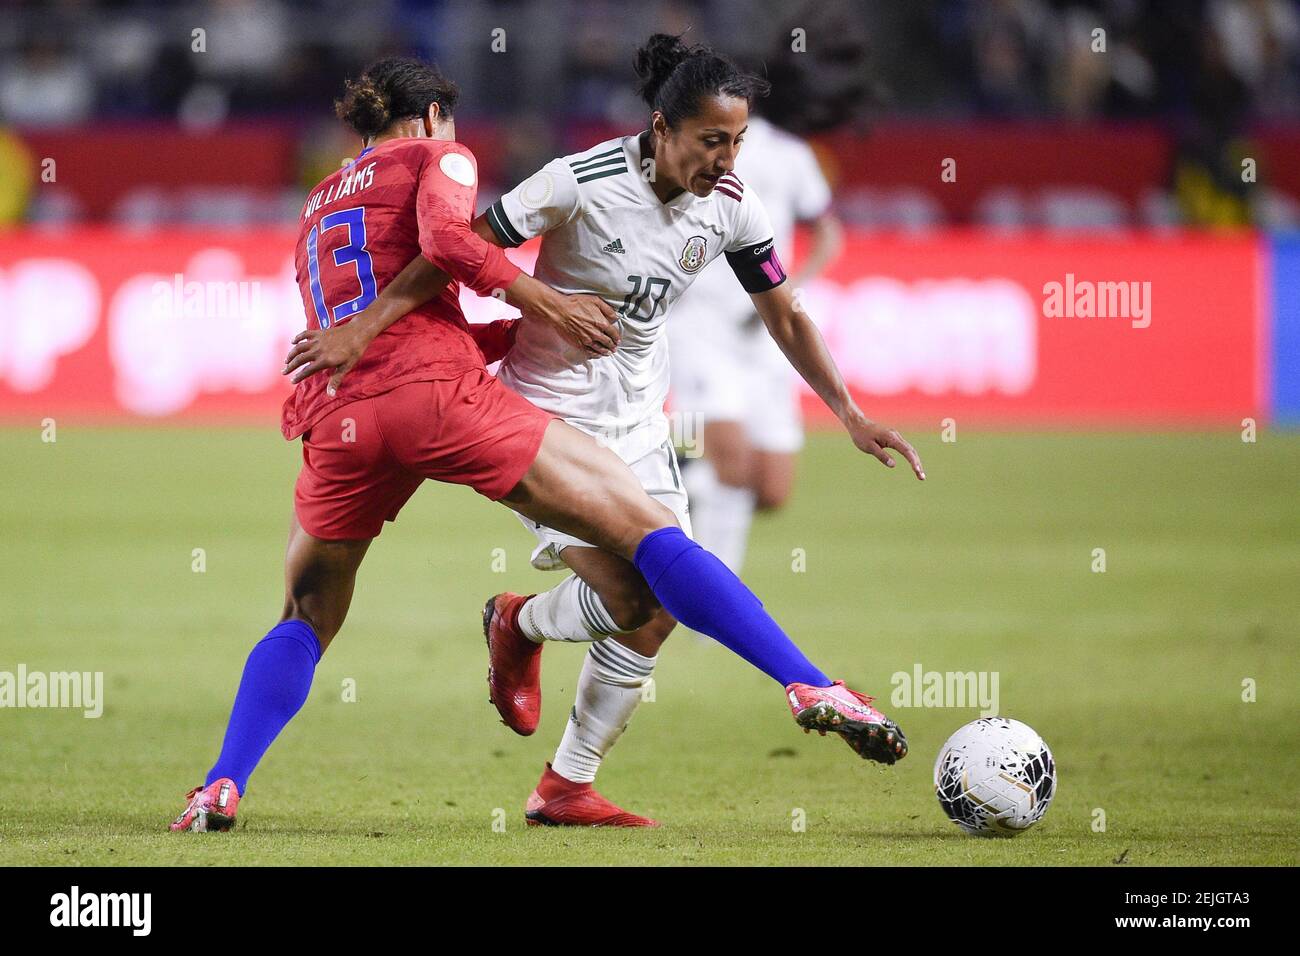 Feb 7, 2020; Los Angeles, California, USA; Mexico midfielder Stephany Mayor (10) moves the ball while United States forward Lynn Williams (13) defends during the second half of the CONCACAF Women's Olympic Qualifying soccer tournament at Dignity Health Sports Park. Mandatory Credit: Kelvin Kuo-USA TODAY Sports/Sipa USA Stock Photo